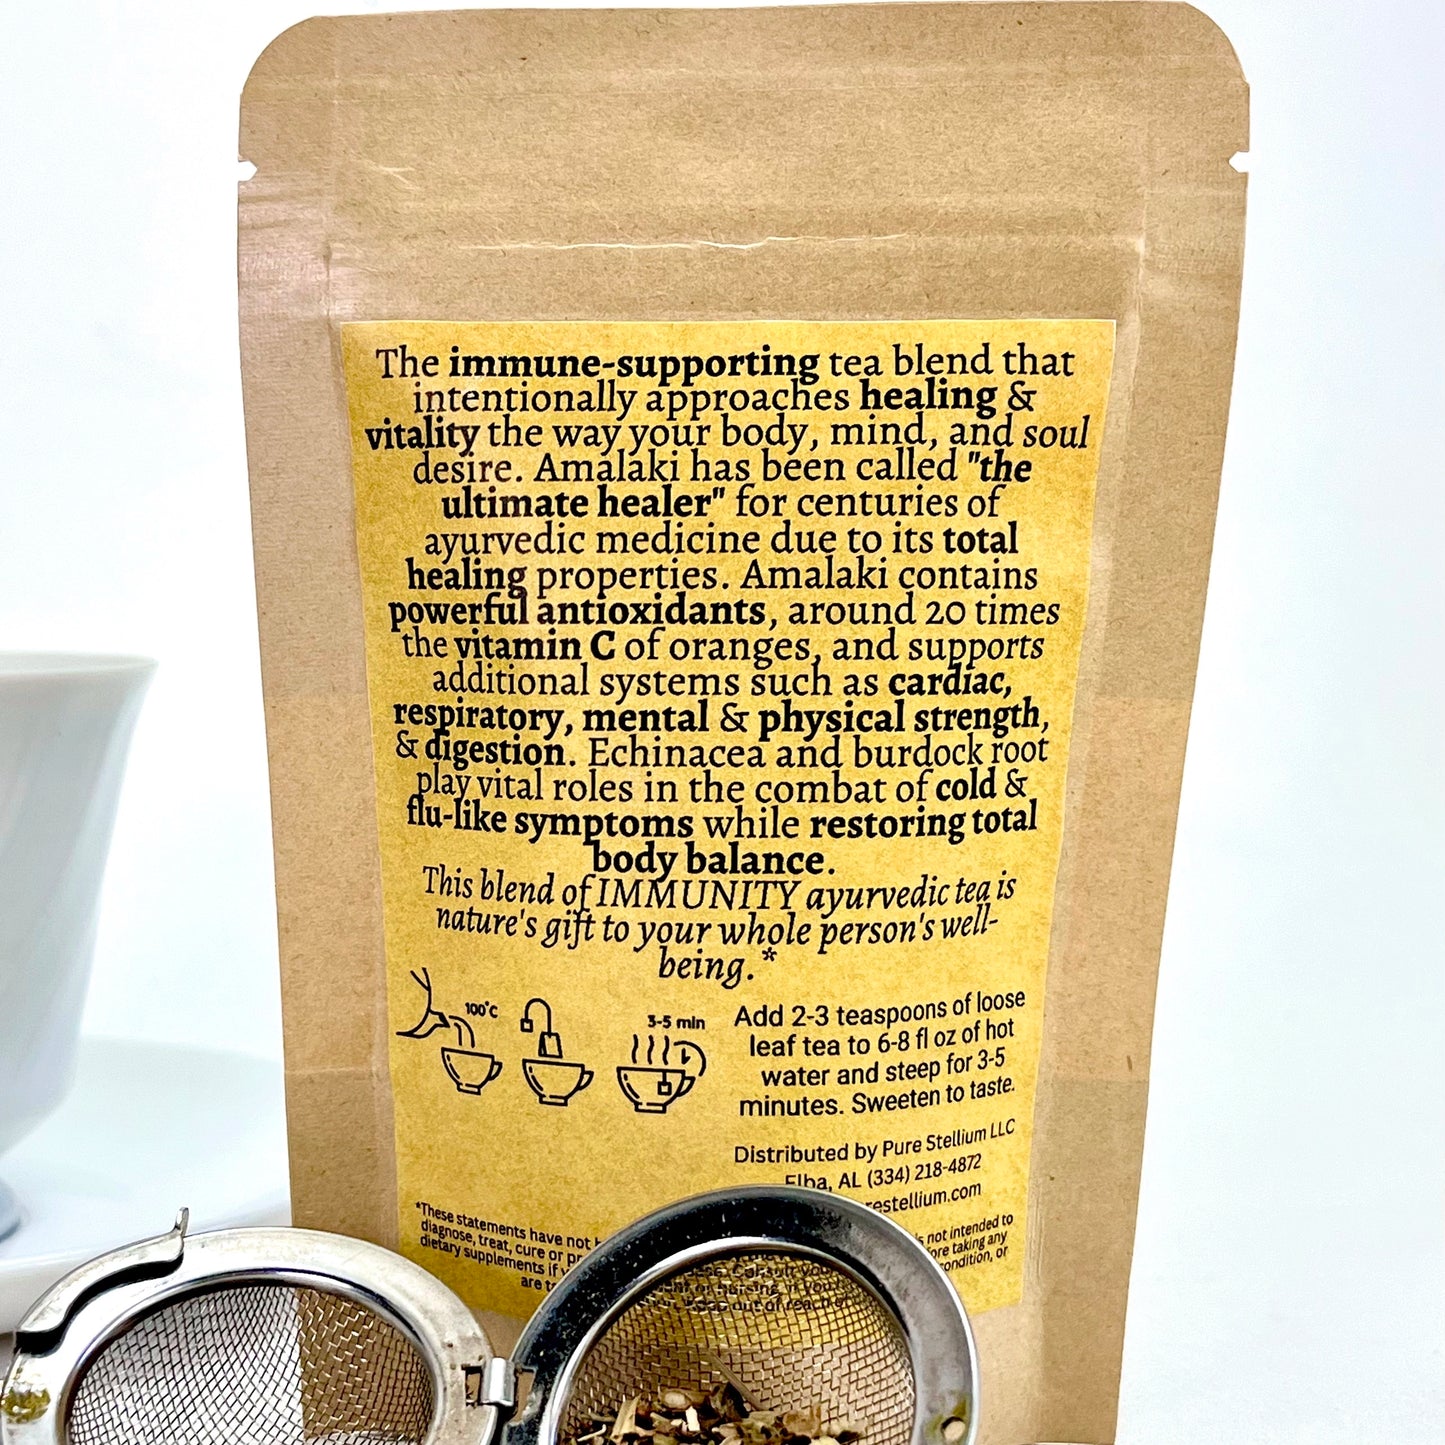 The package of Elemental Life Product's Immunity loose leaf tea blend with raw ingredients in open tea ball